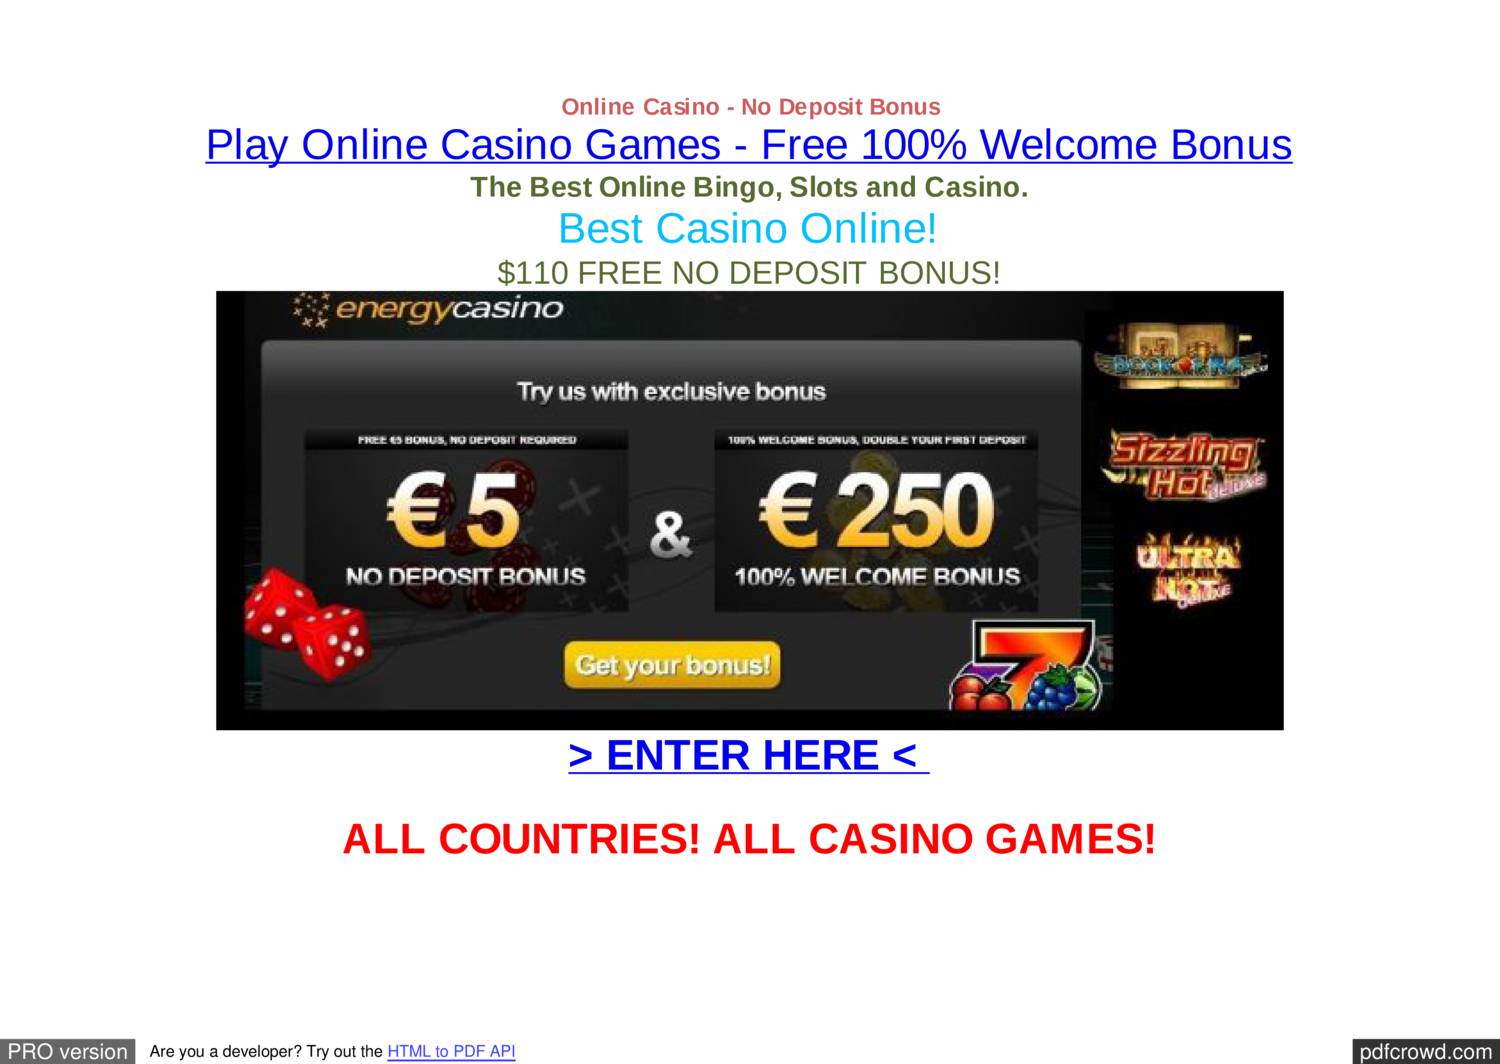 online casinos - How To Be More Productive?